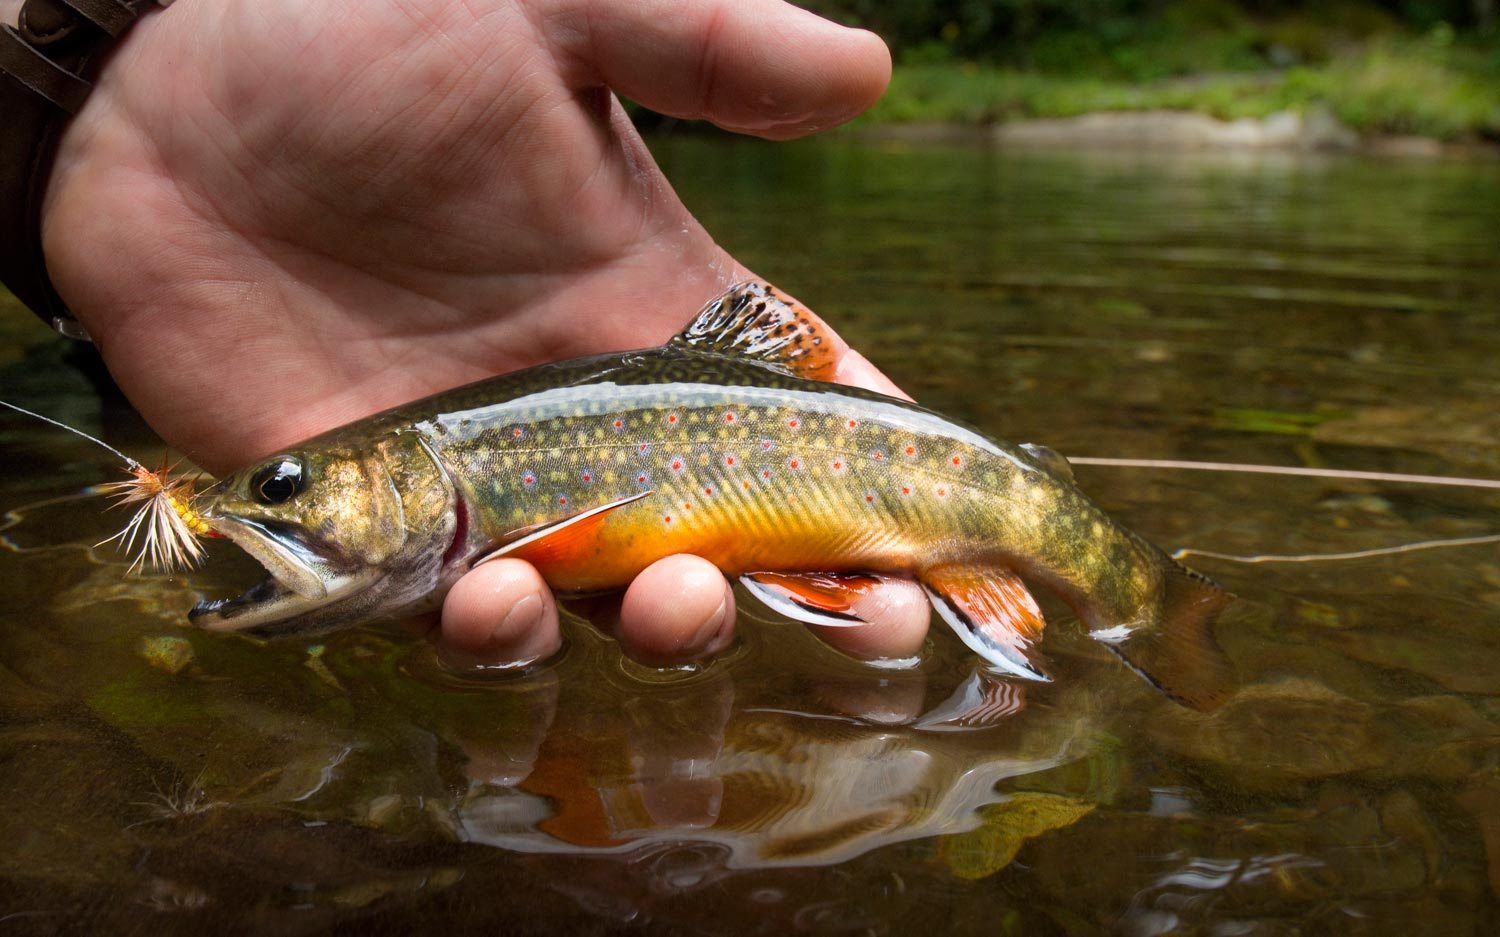 BROOK TROUT FISHING OPPORTUNITIES… THERE ARE MORE THAN YOU THINK